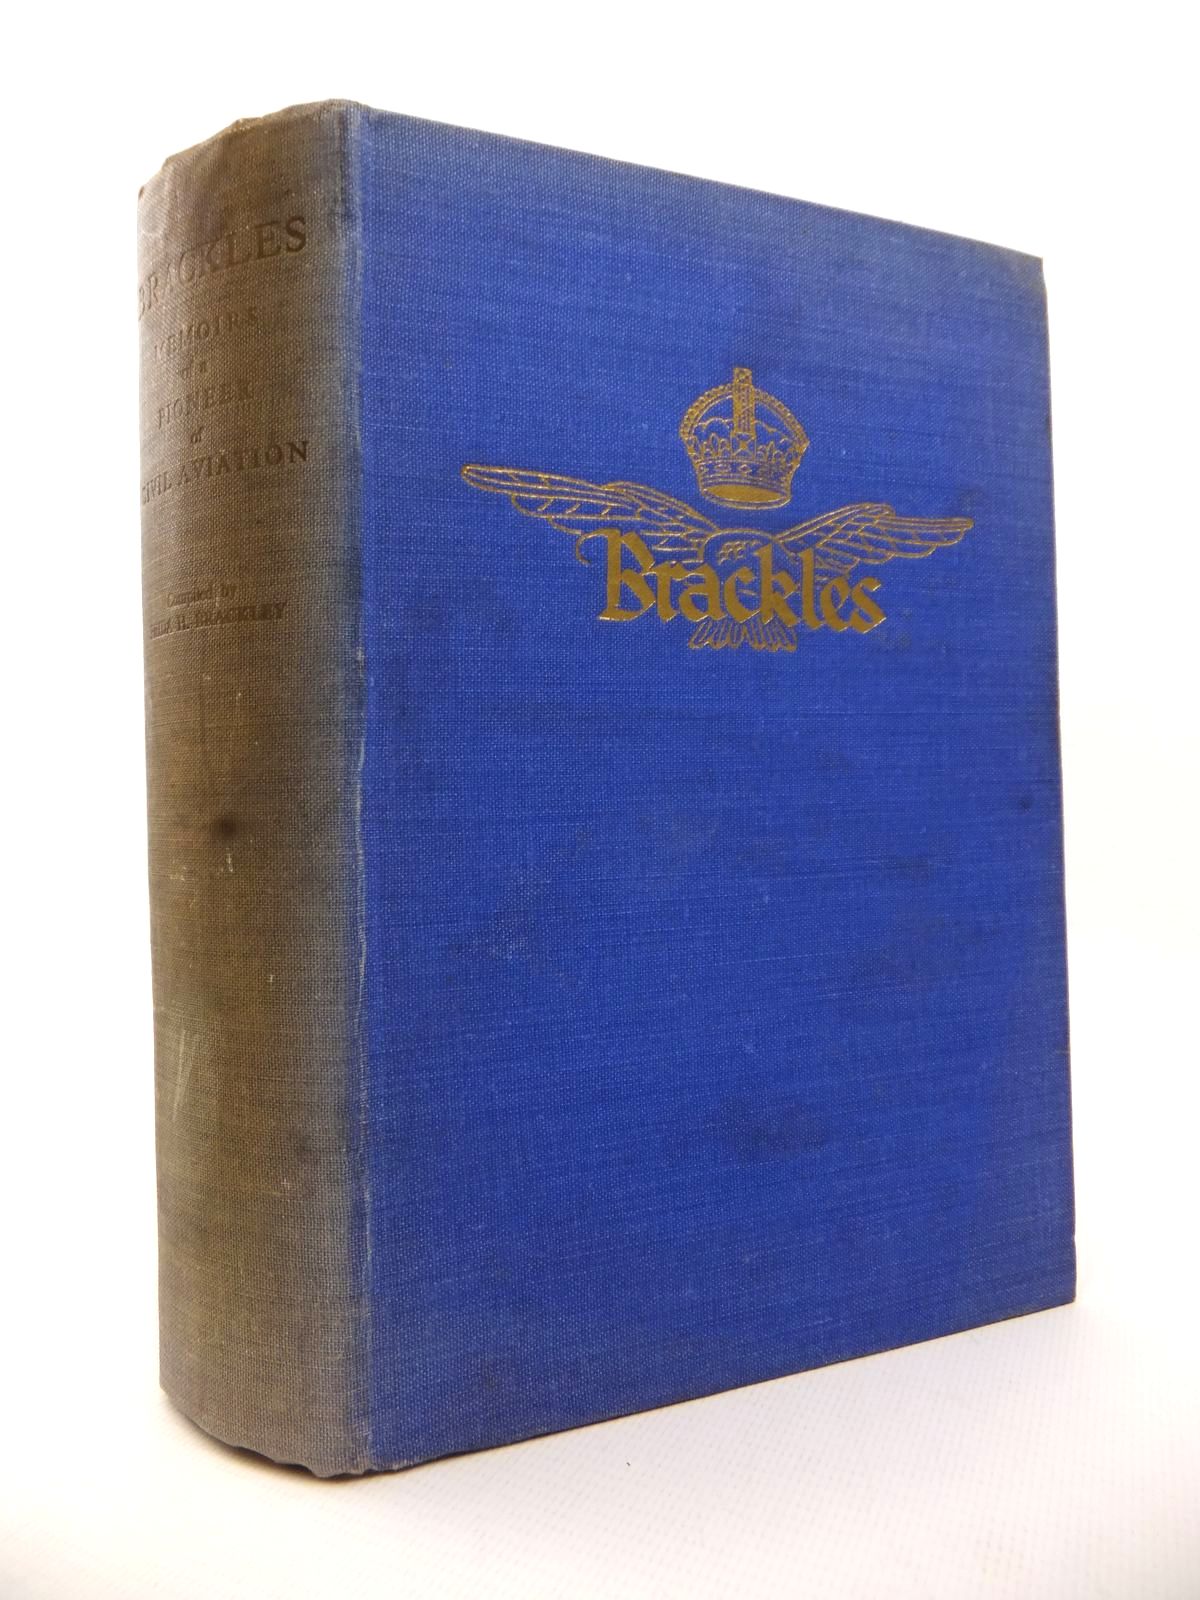 Photo of BRACKLES: MEMOIRS OF A PIONEER OF CIVIL AVIATION written by Brackley, Frida H. published by W. &amp; J. Mackay &amp; Co. Ltd. (STOCK CODE: 1812898)  for sale by Stella & Rose's Books